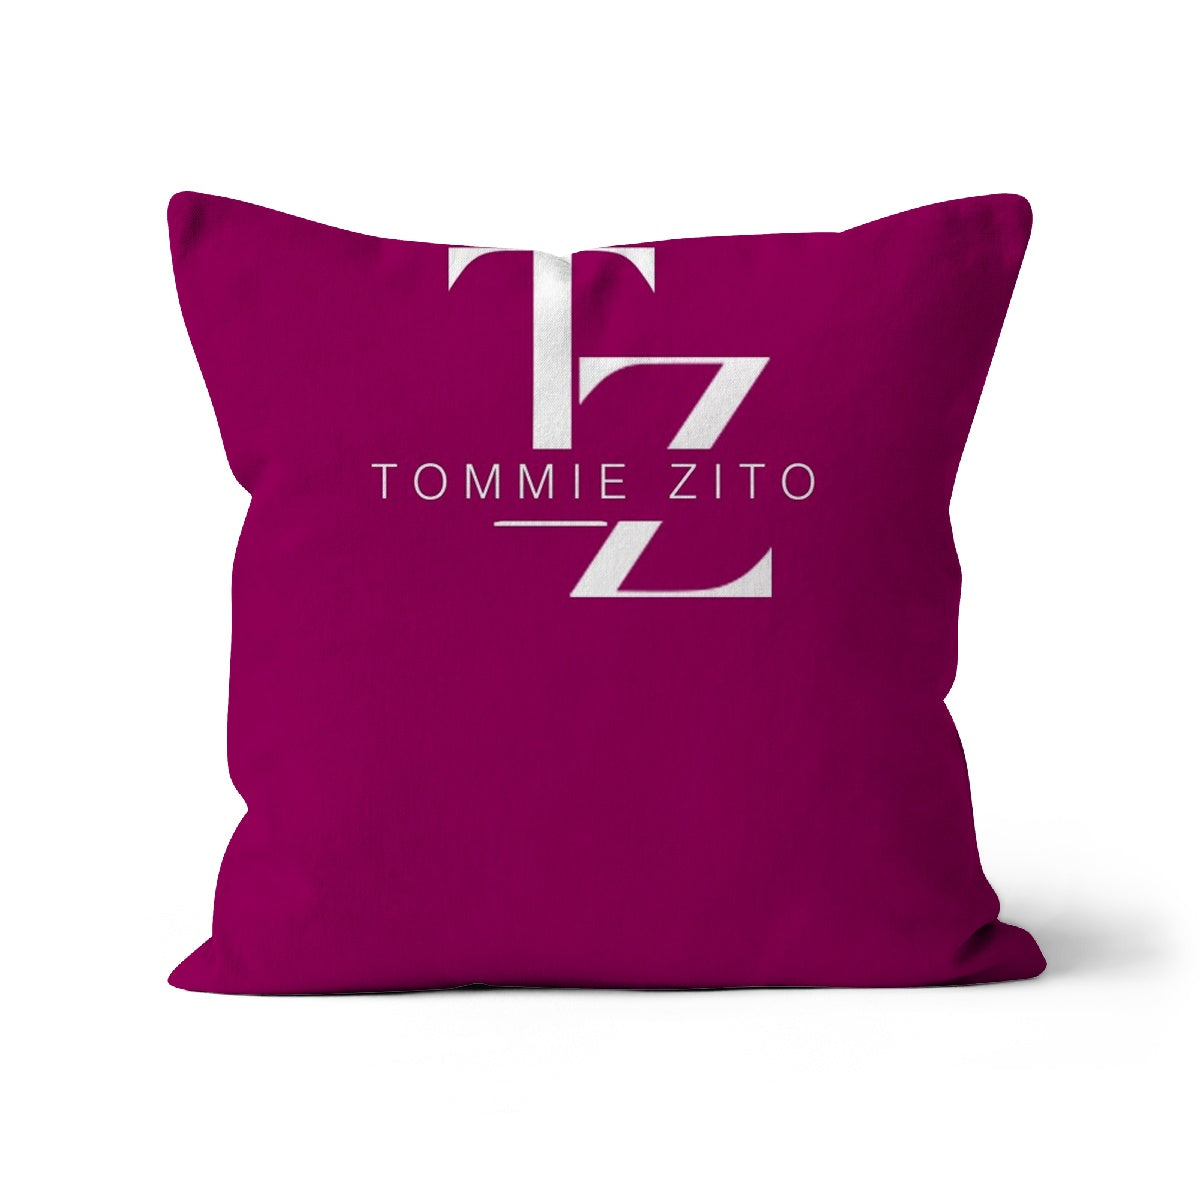 Tommie Zito  Cushion